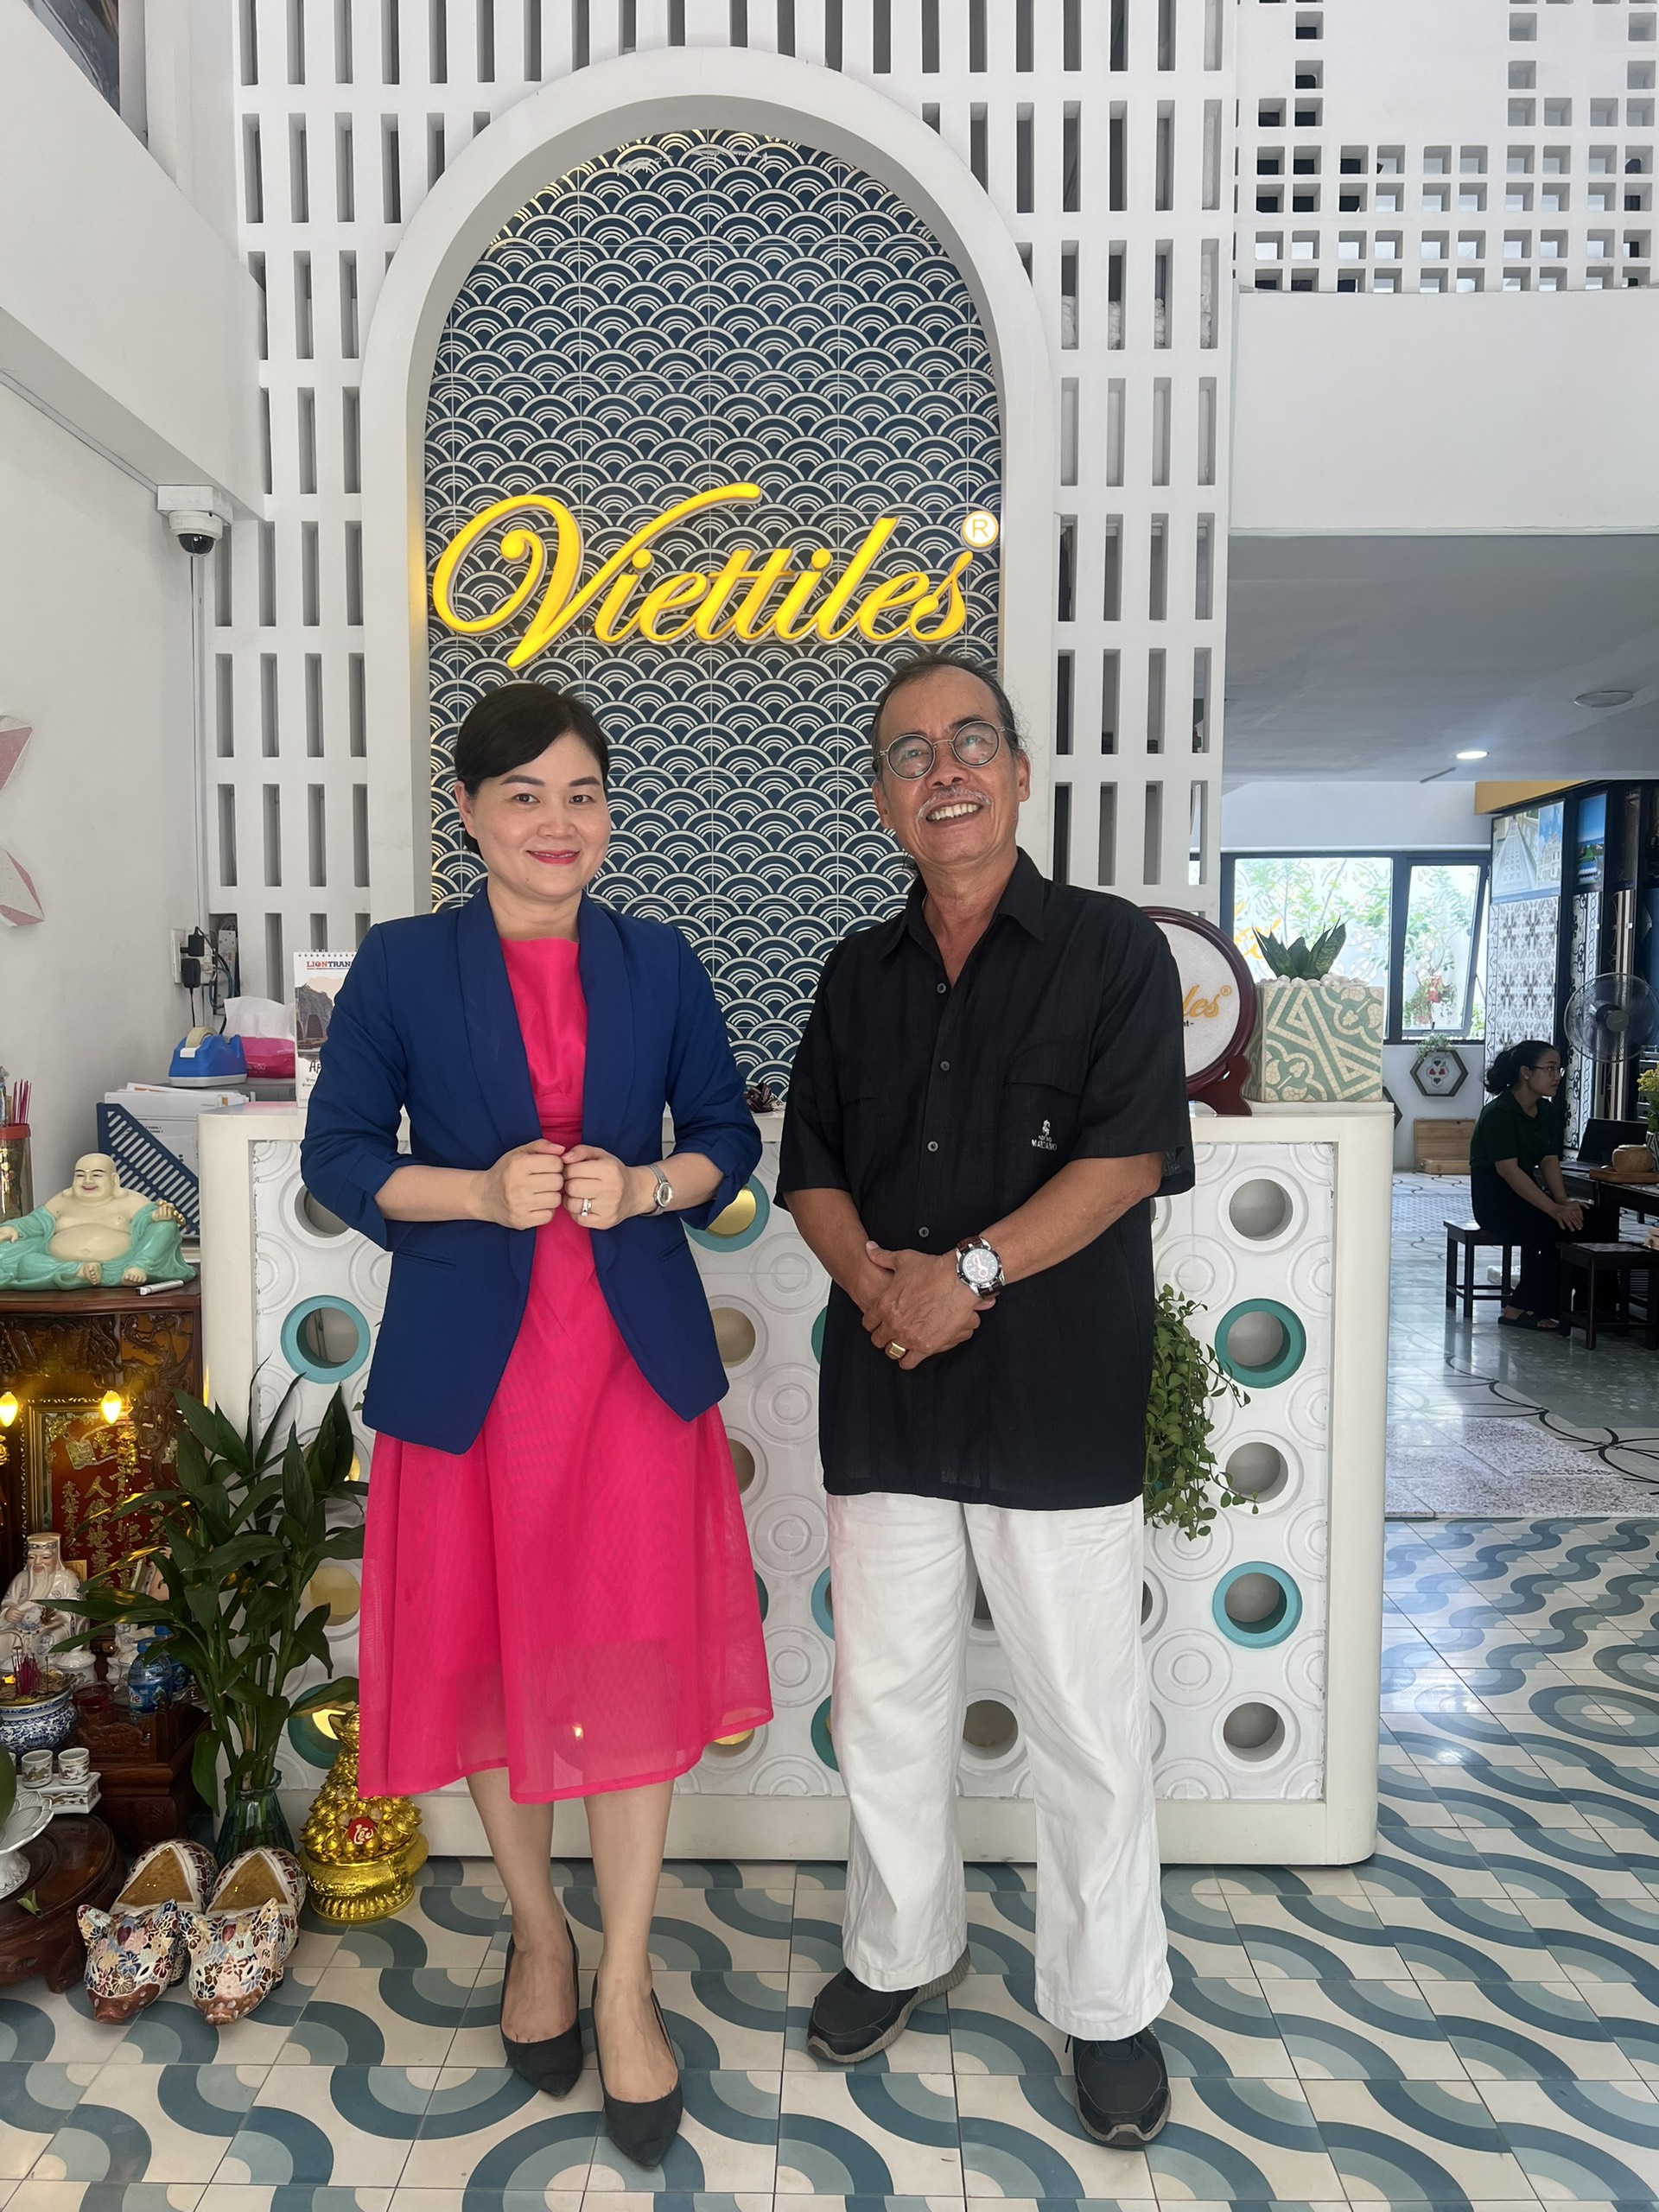 Viettiles thanks Master  Phuc for visiting the Viettiles showroom - The place to display artistic unburnt building materials products